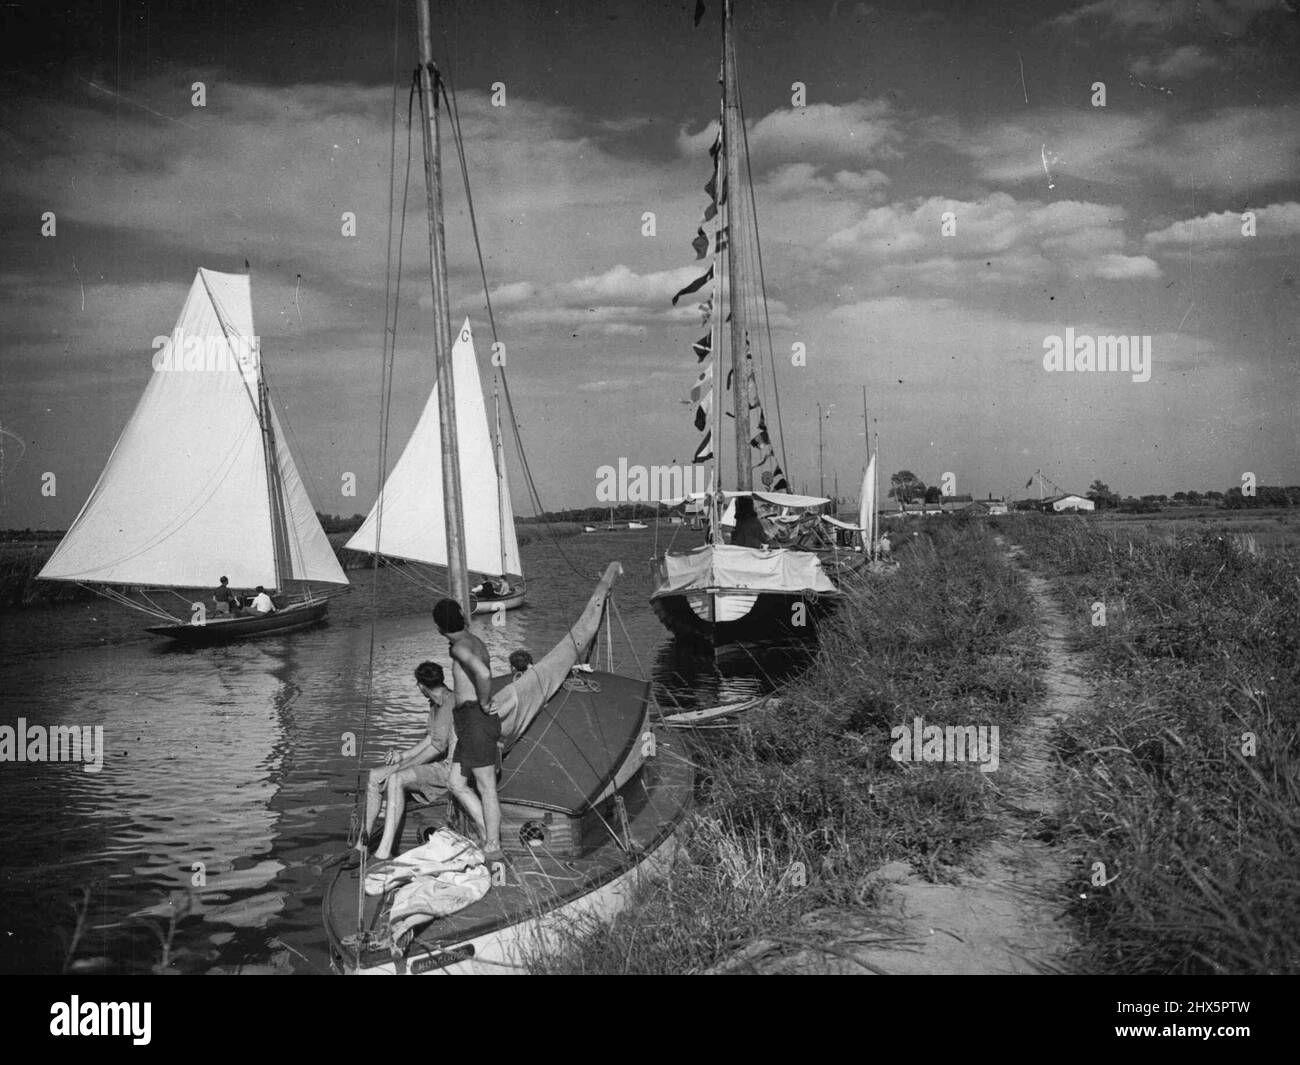 Holiday Joys On The Borads -- Despite the rush to the Continent for holiday this year, yachting on the Norflok Broads is still the most popular 'holiday at home'. July 30, 1946. (Photo by Mirror Features). Stock Photo